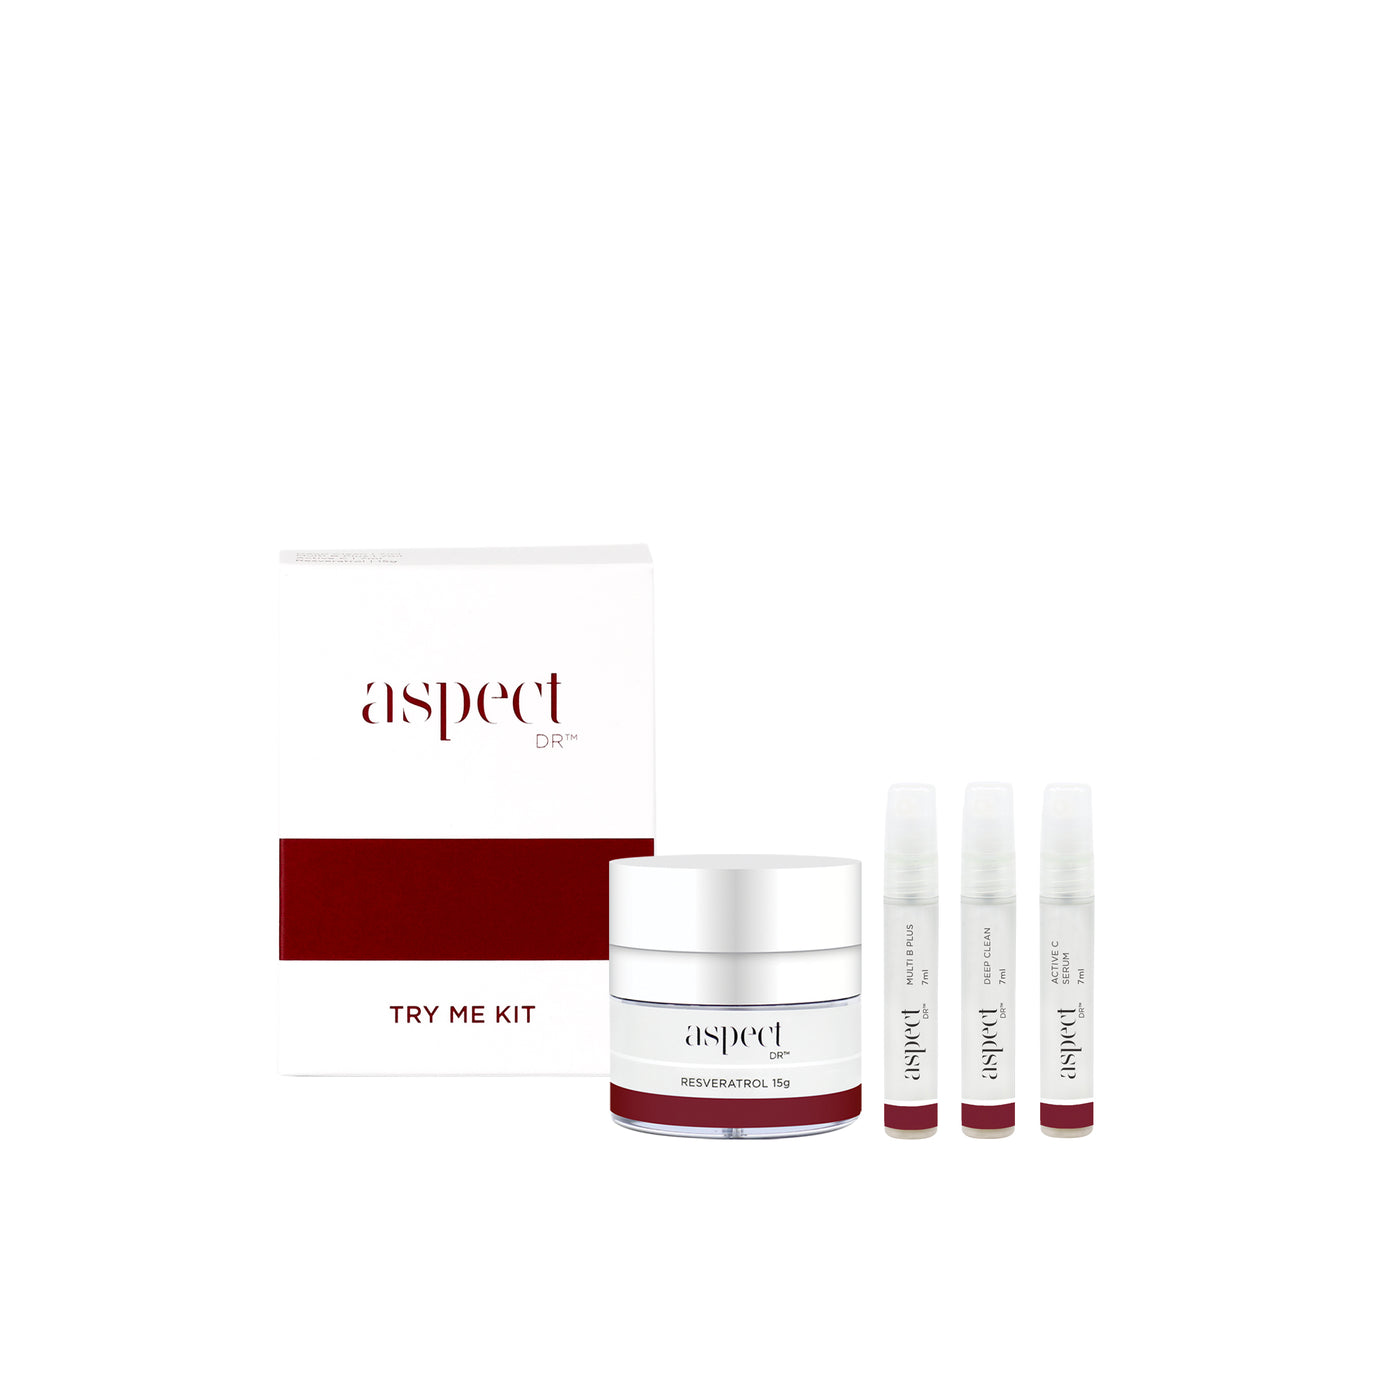 ASPECT DR Skincare TRY ME KIT - Exquisite Laser Clinic 